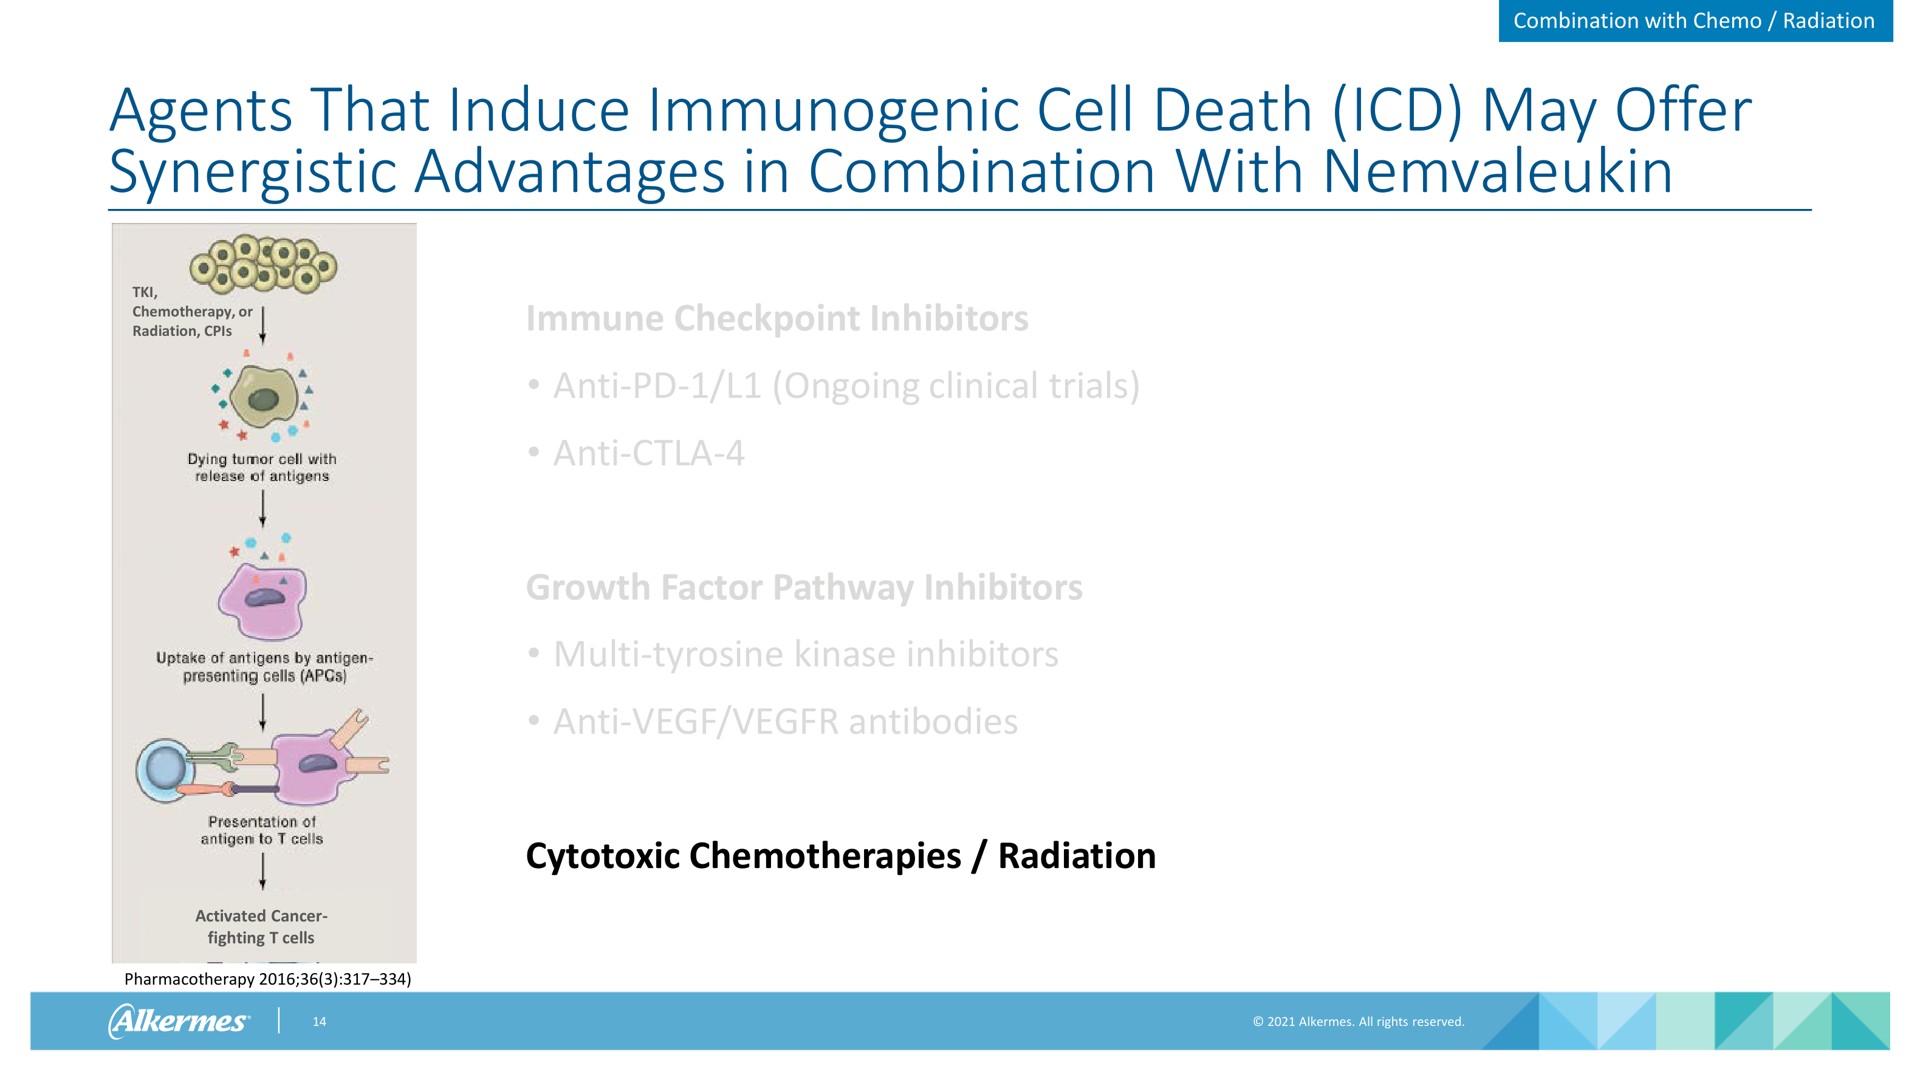 agents that induce immunogenic cell death may offer synergistic advantages in combination with combination with radiation chemotherapy or radiation immune inhibitors anti ongoing clinical trials anti growth factor pathway inhibitors tyrosine kinase inhibitors anti antibodies cytotoxic chemotherapies radiation activated cancer fighting cells pharmacotherapy alkermes | Alkermes